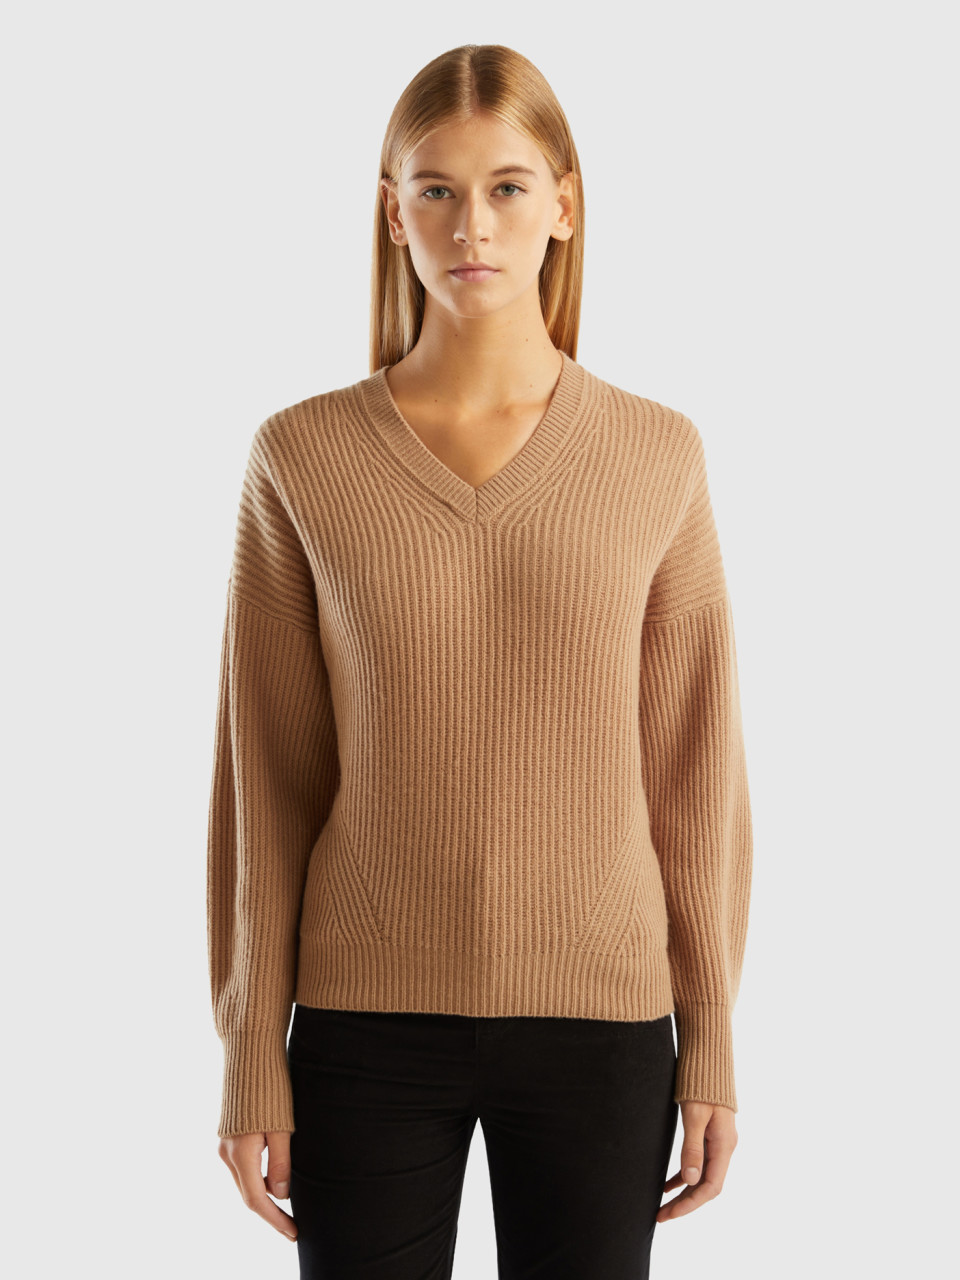 Benetton, Soft Sweater With V-neck, Camel, Women